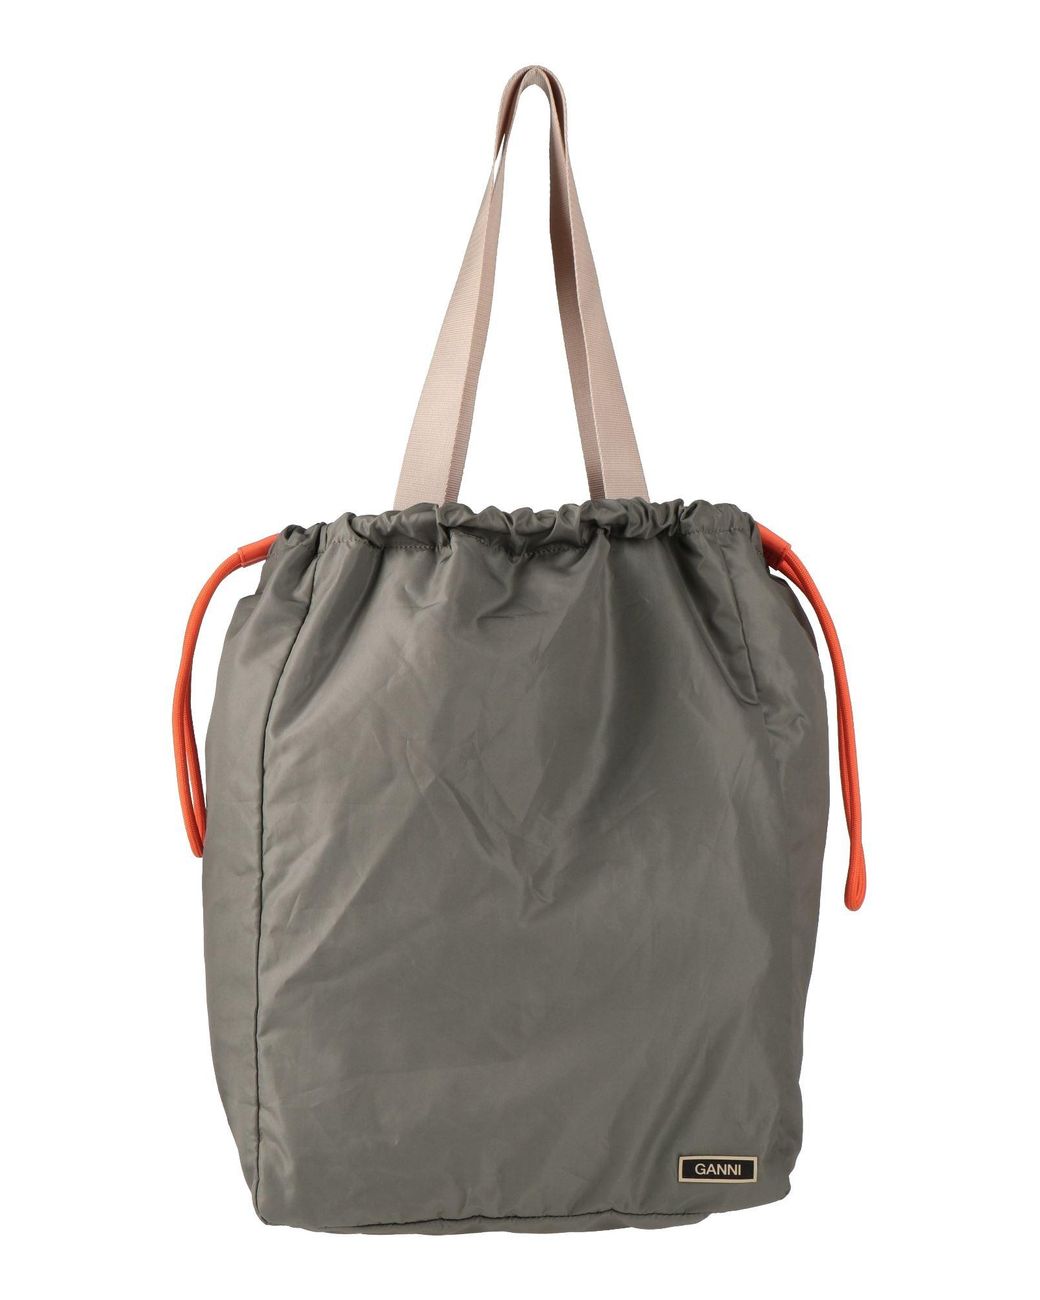 Ganni Synthetic Shoulder Bag in Military Green (Green) | Lyst UK